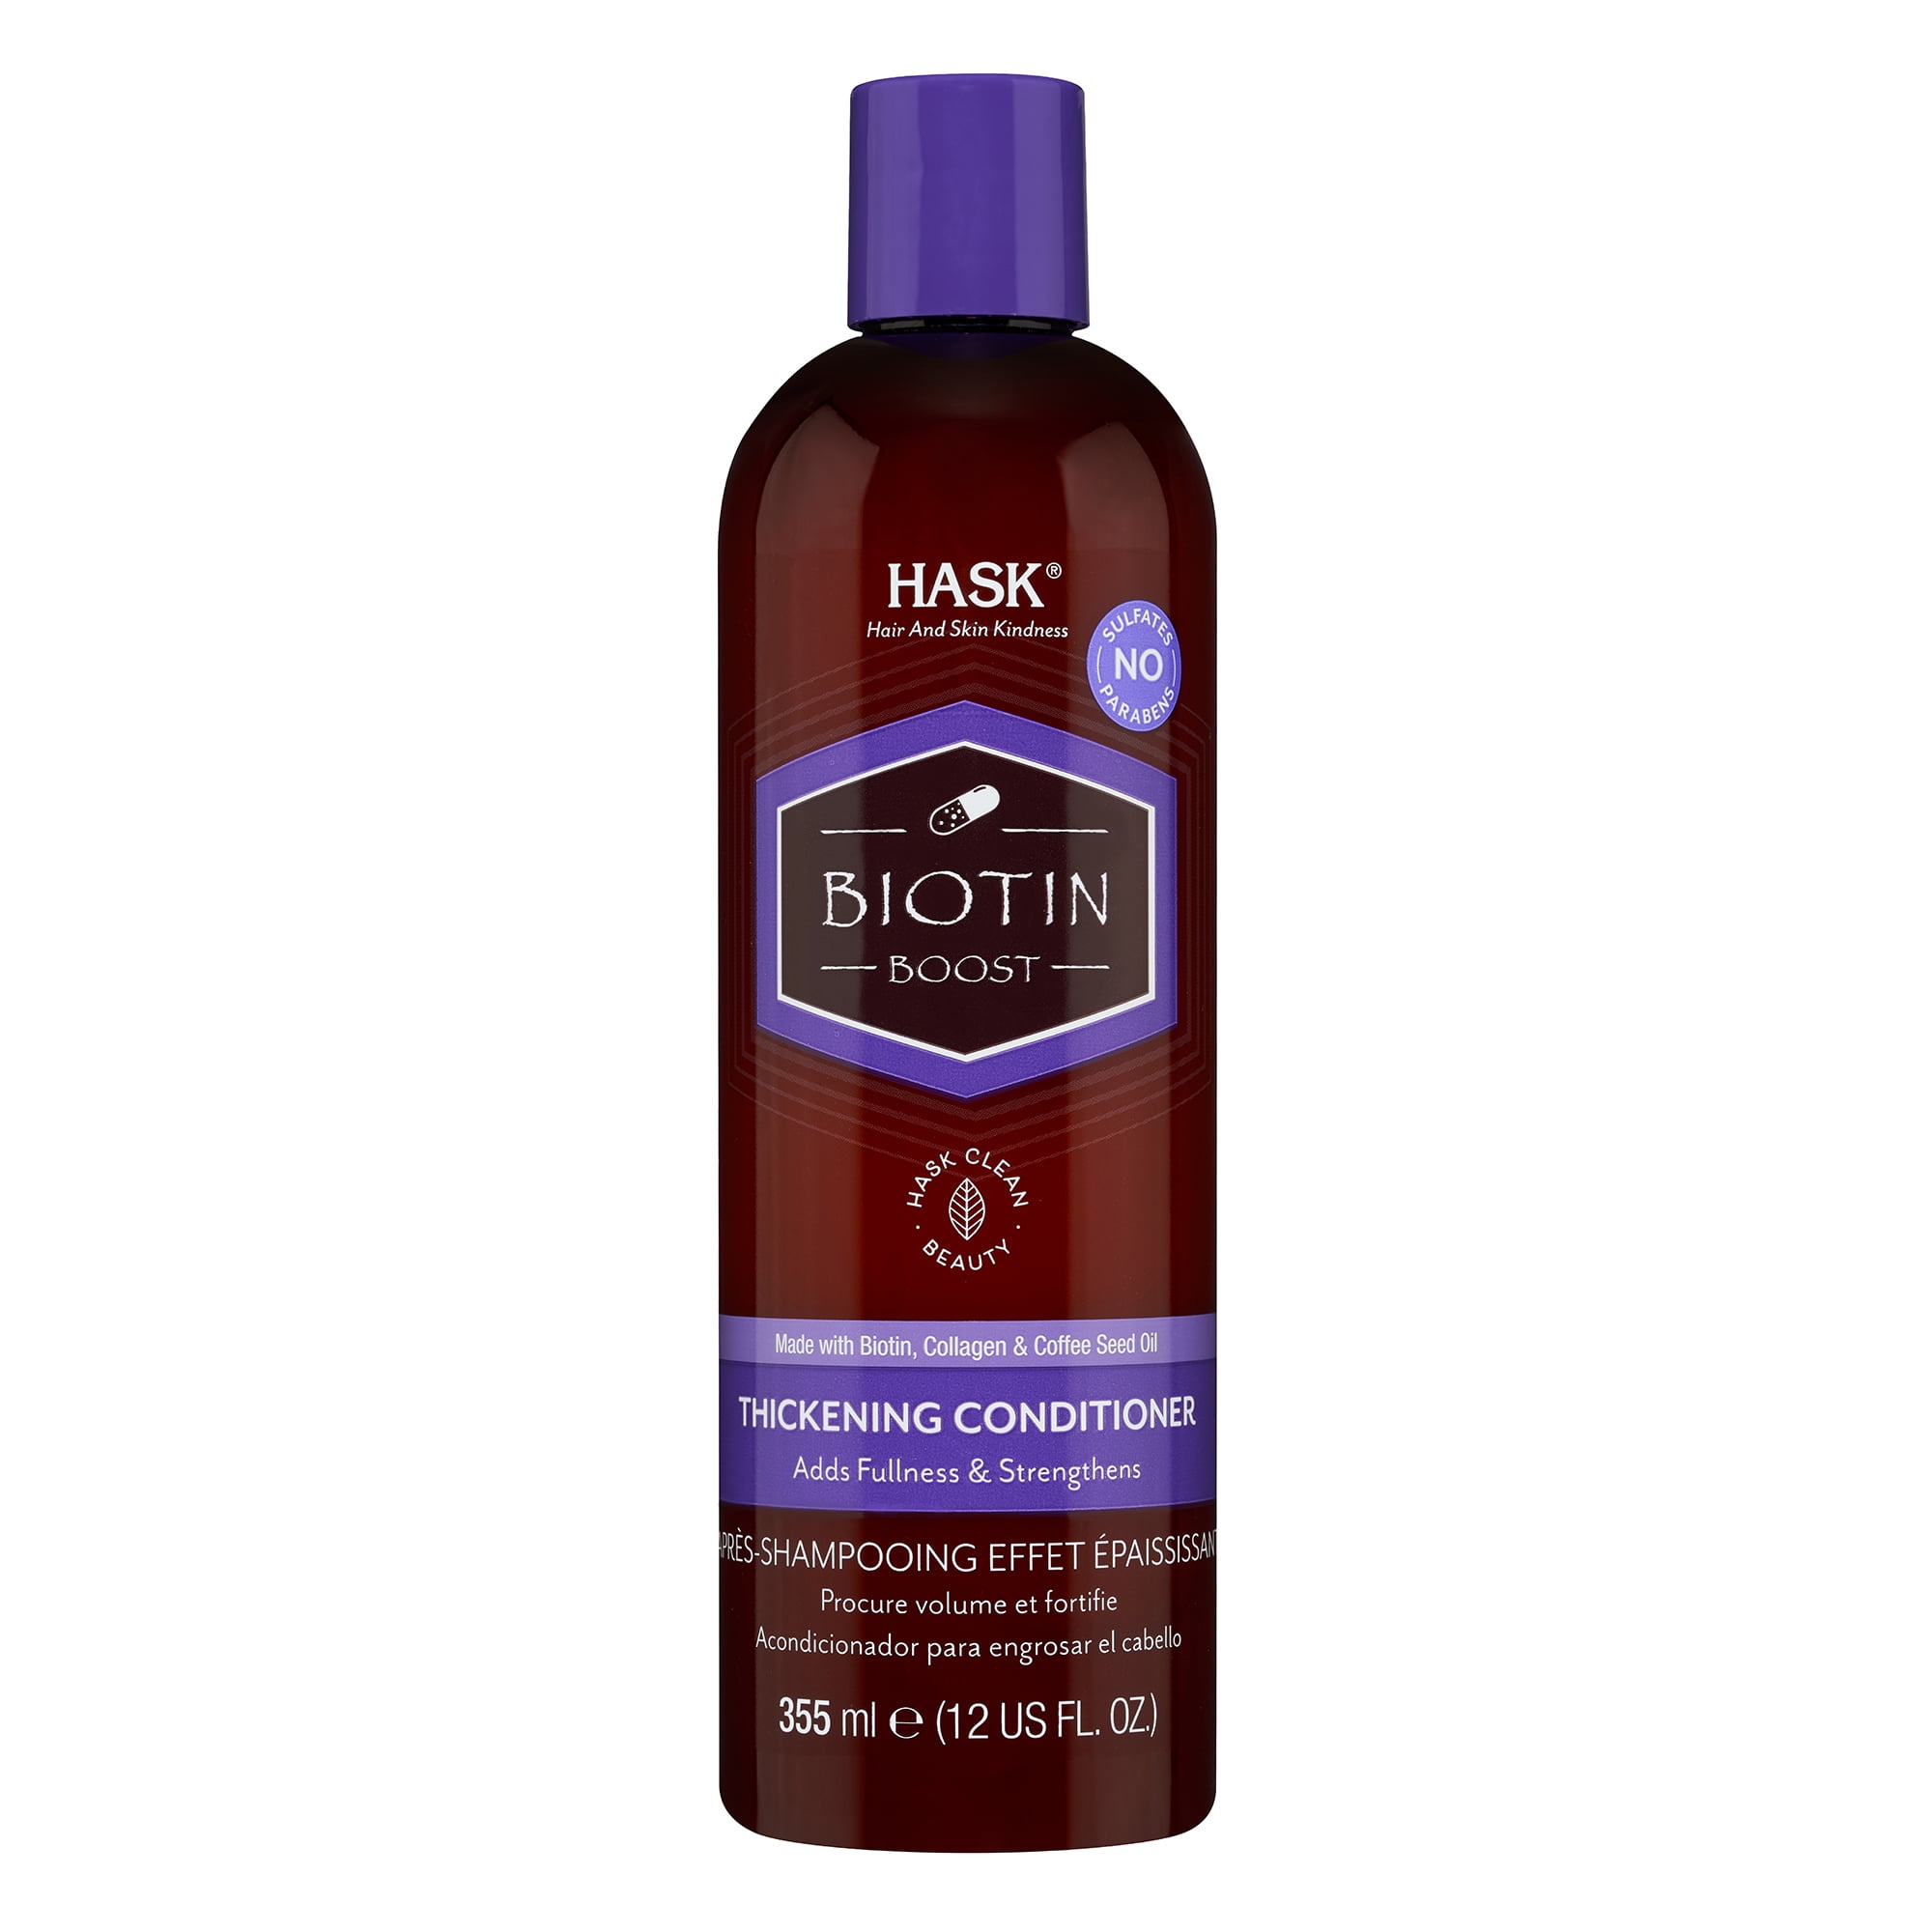 Hask Biotin Boost Thickening Volumizing Daily Conditioner with Collagen & Invigorating Herbaceous, 12 fl oz